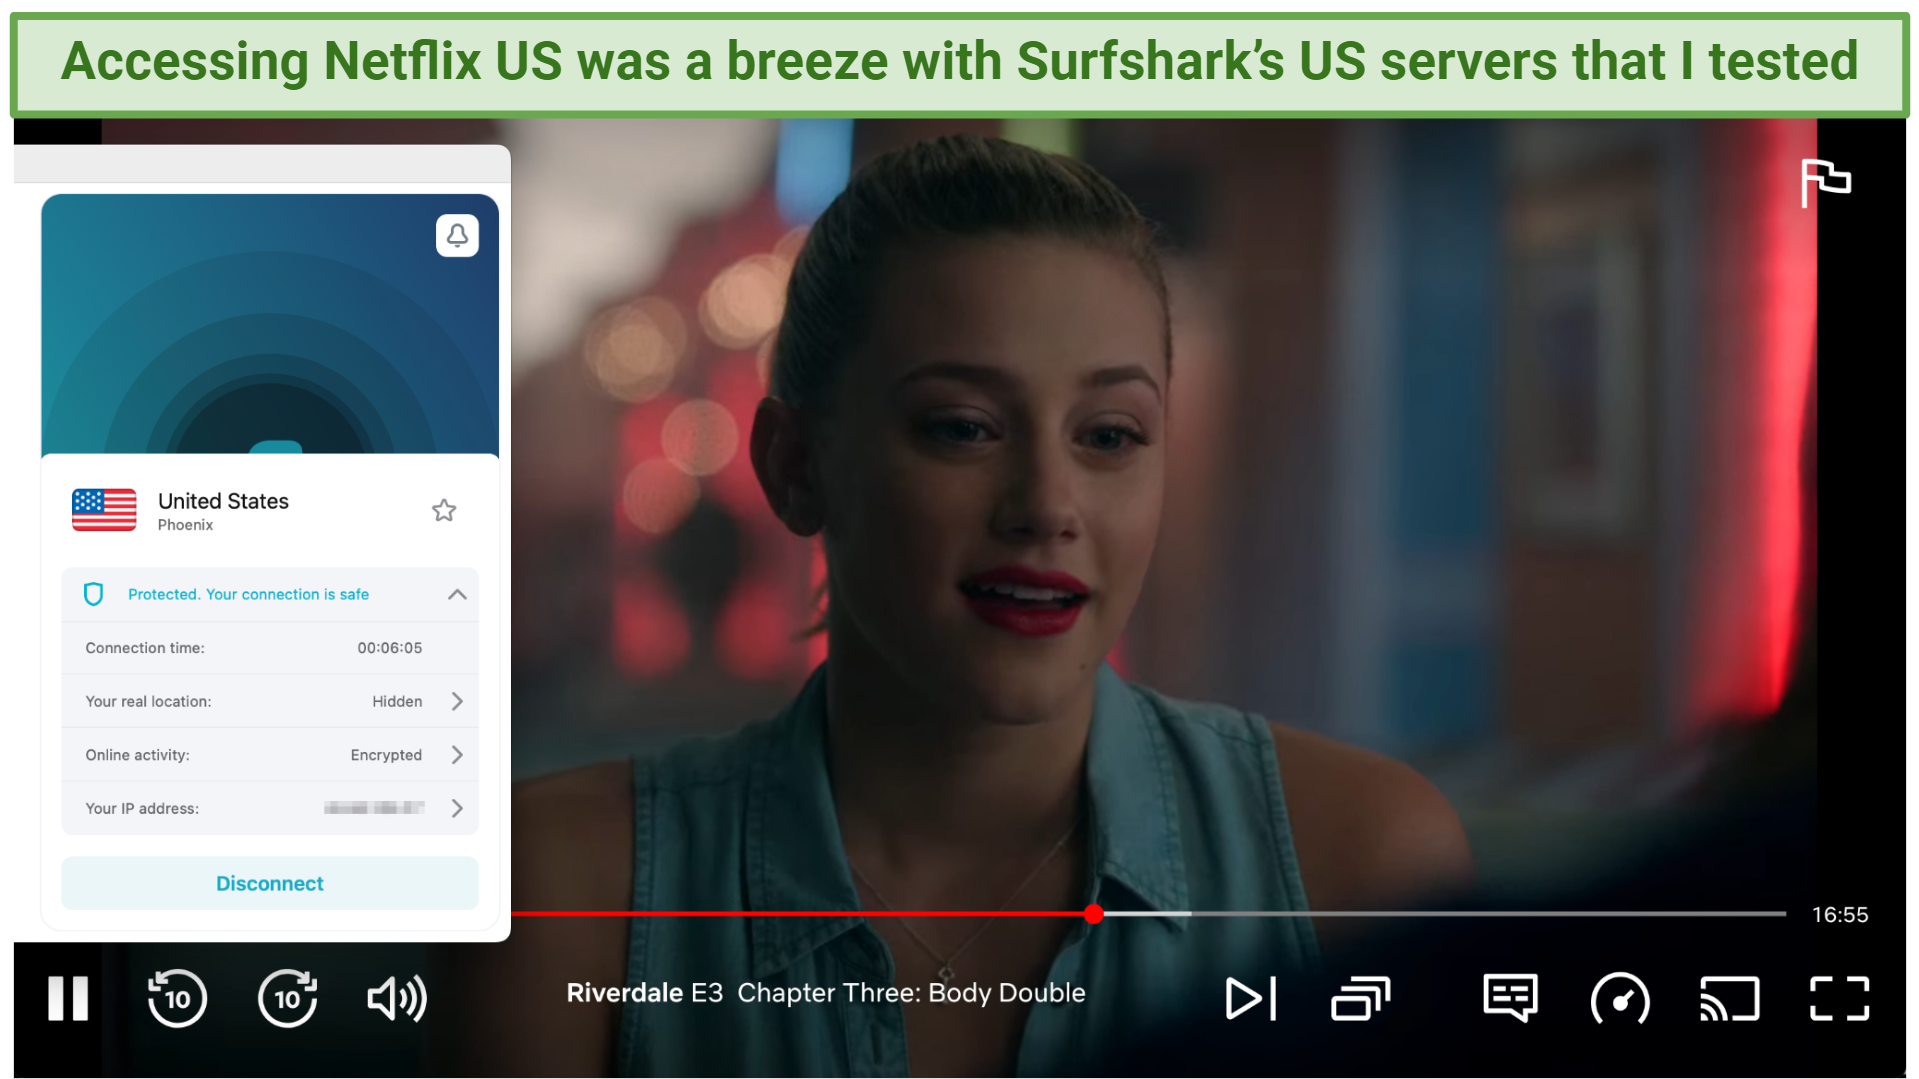 A screenshot showing Riverdale playing while connected to Surfshark's Phoenix, US server